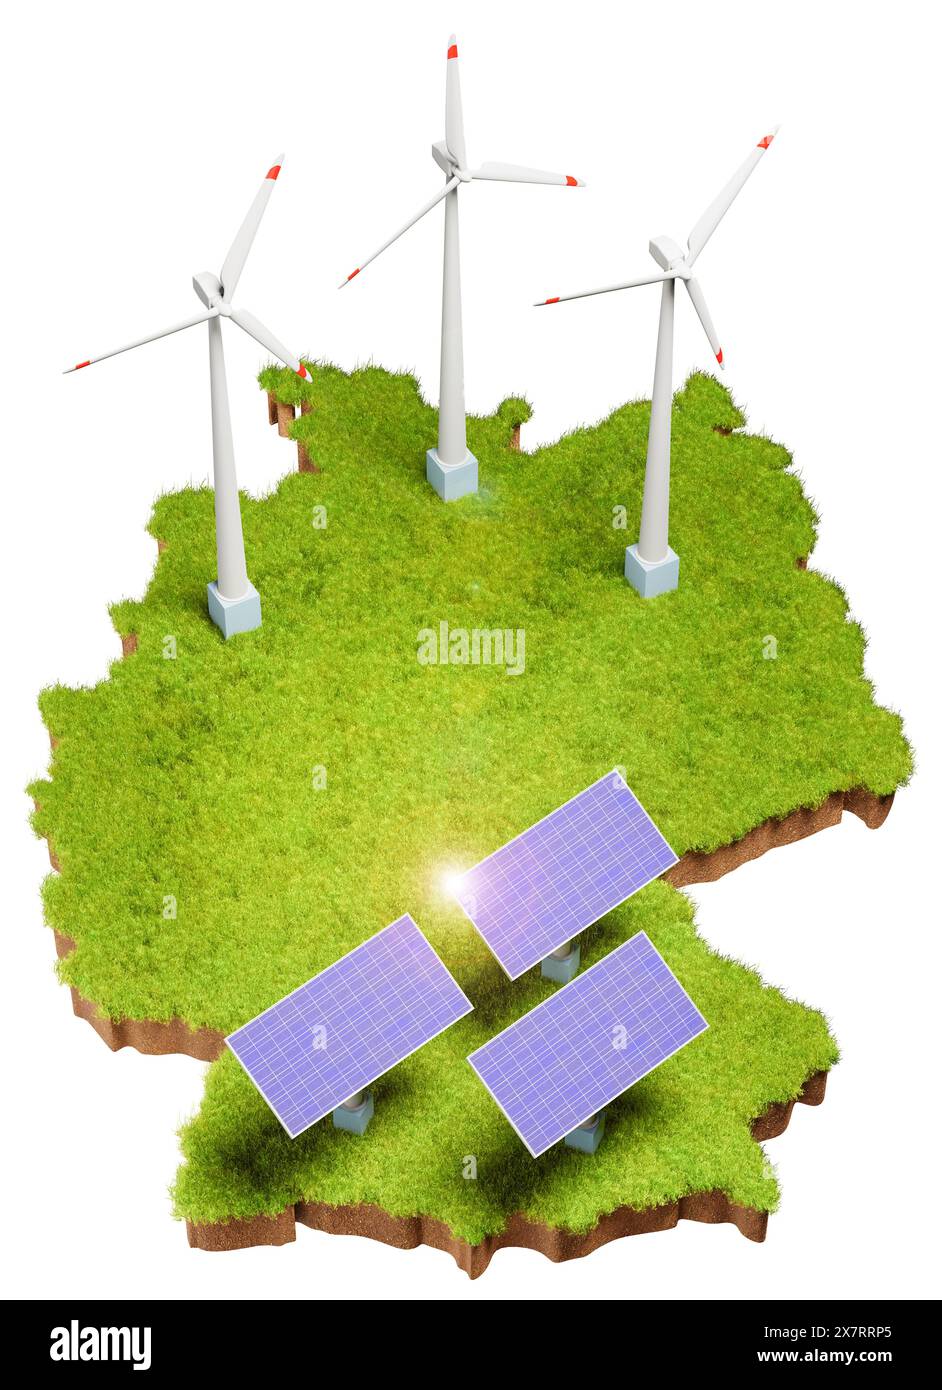 Renewable Energy with solar panels and wind turbines in Germany concept. Grass area with soil below in the form of Germany with added solar panels and Stock Photo